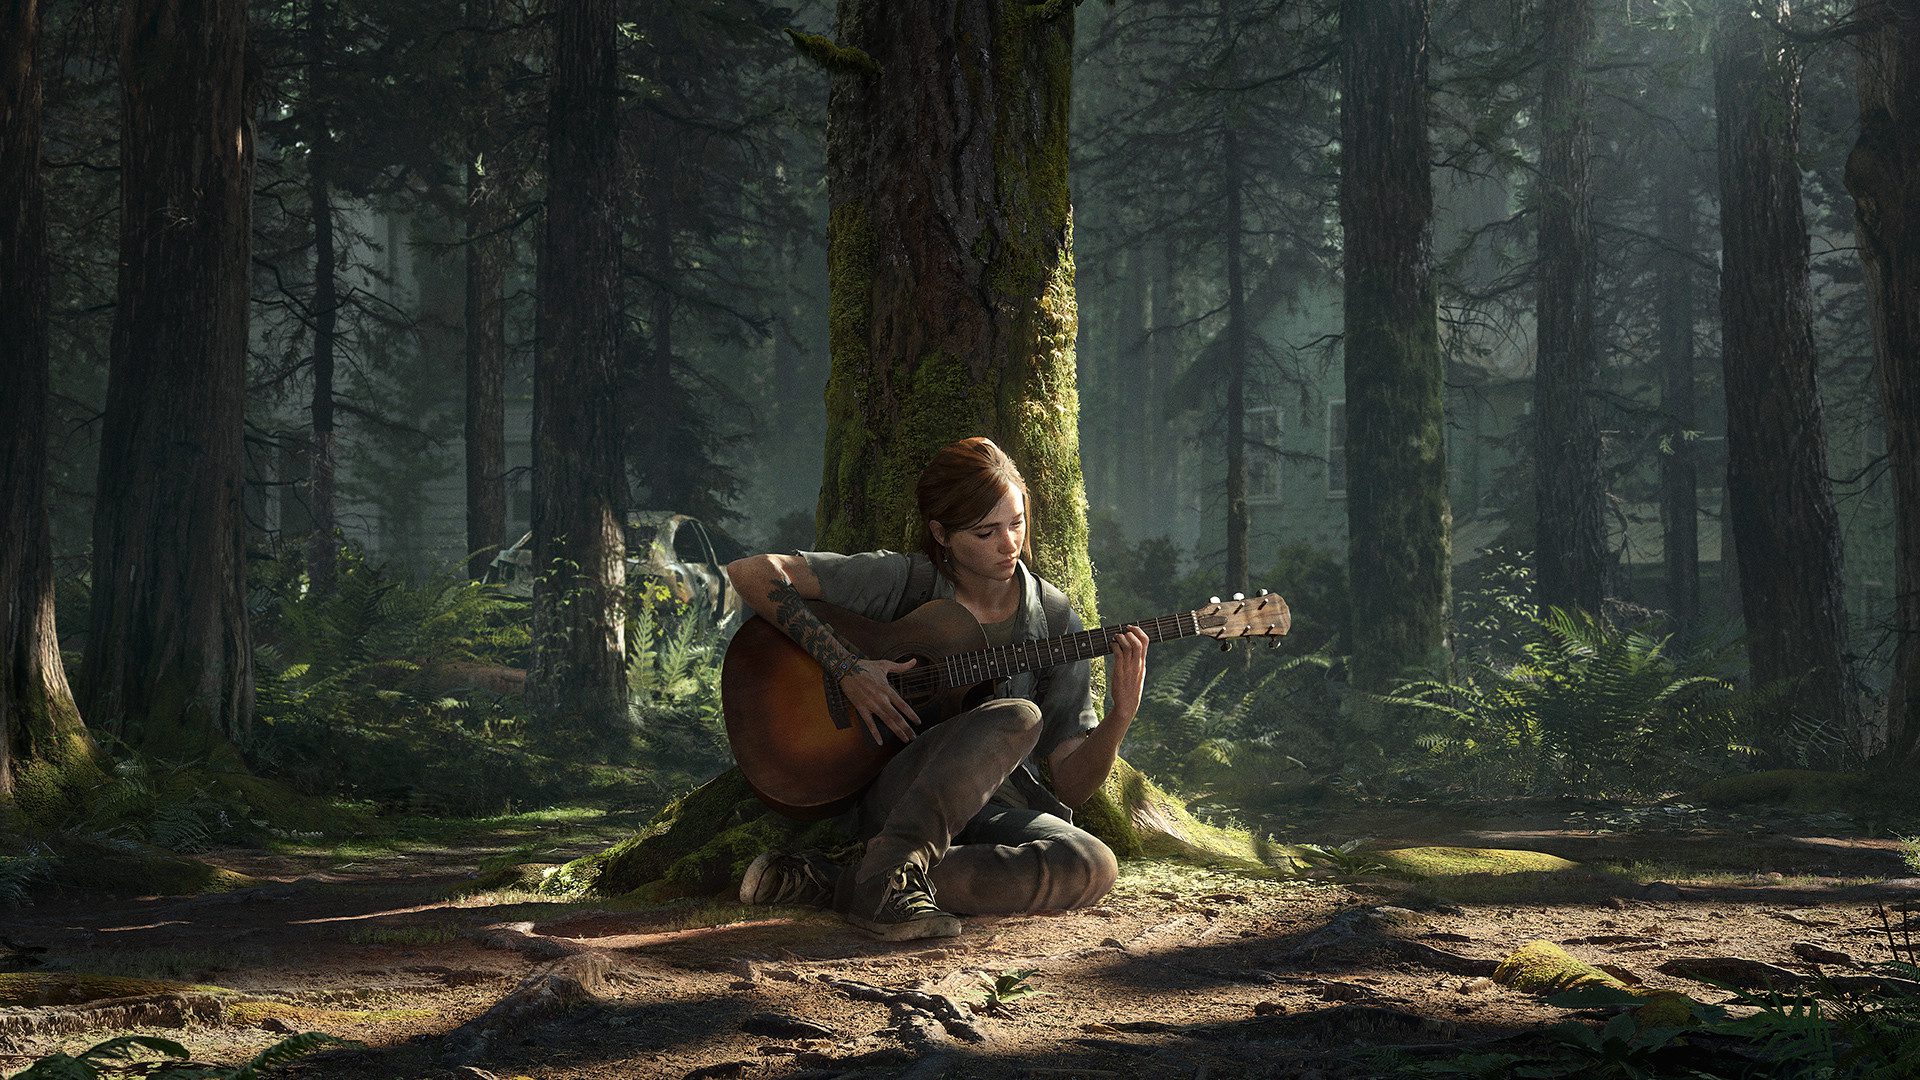 The Last of Us director says Naughty Dog’s next game ‘could redefine dominant perceptions of video games’